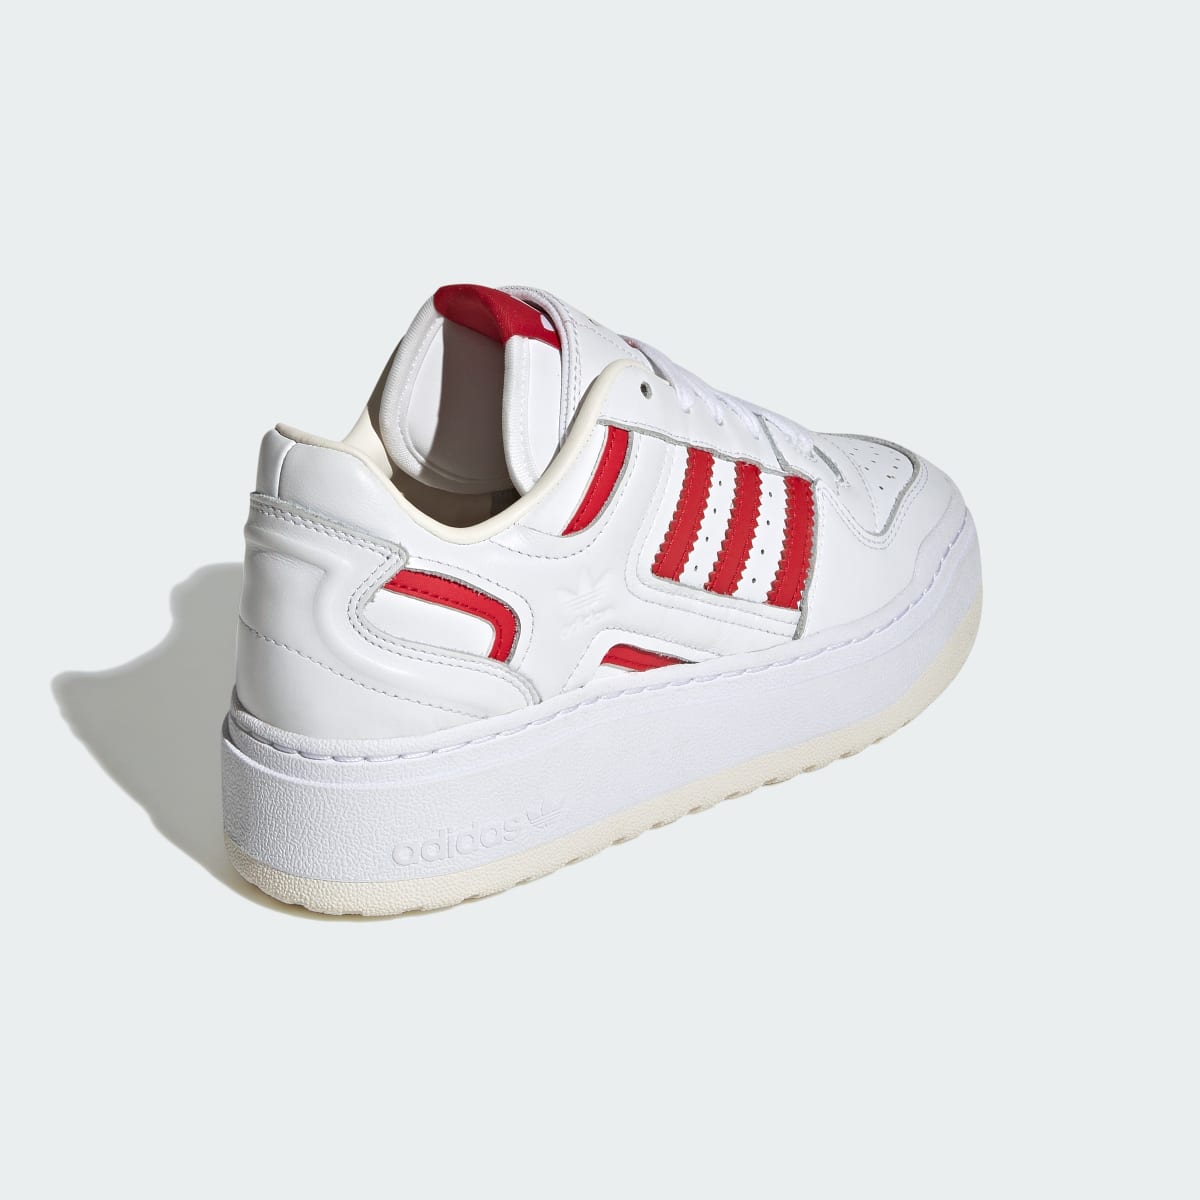 Adidas Chaussure Forum XLG. 6